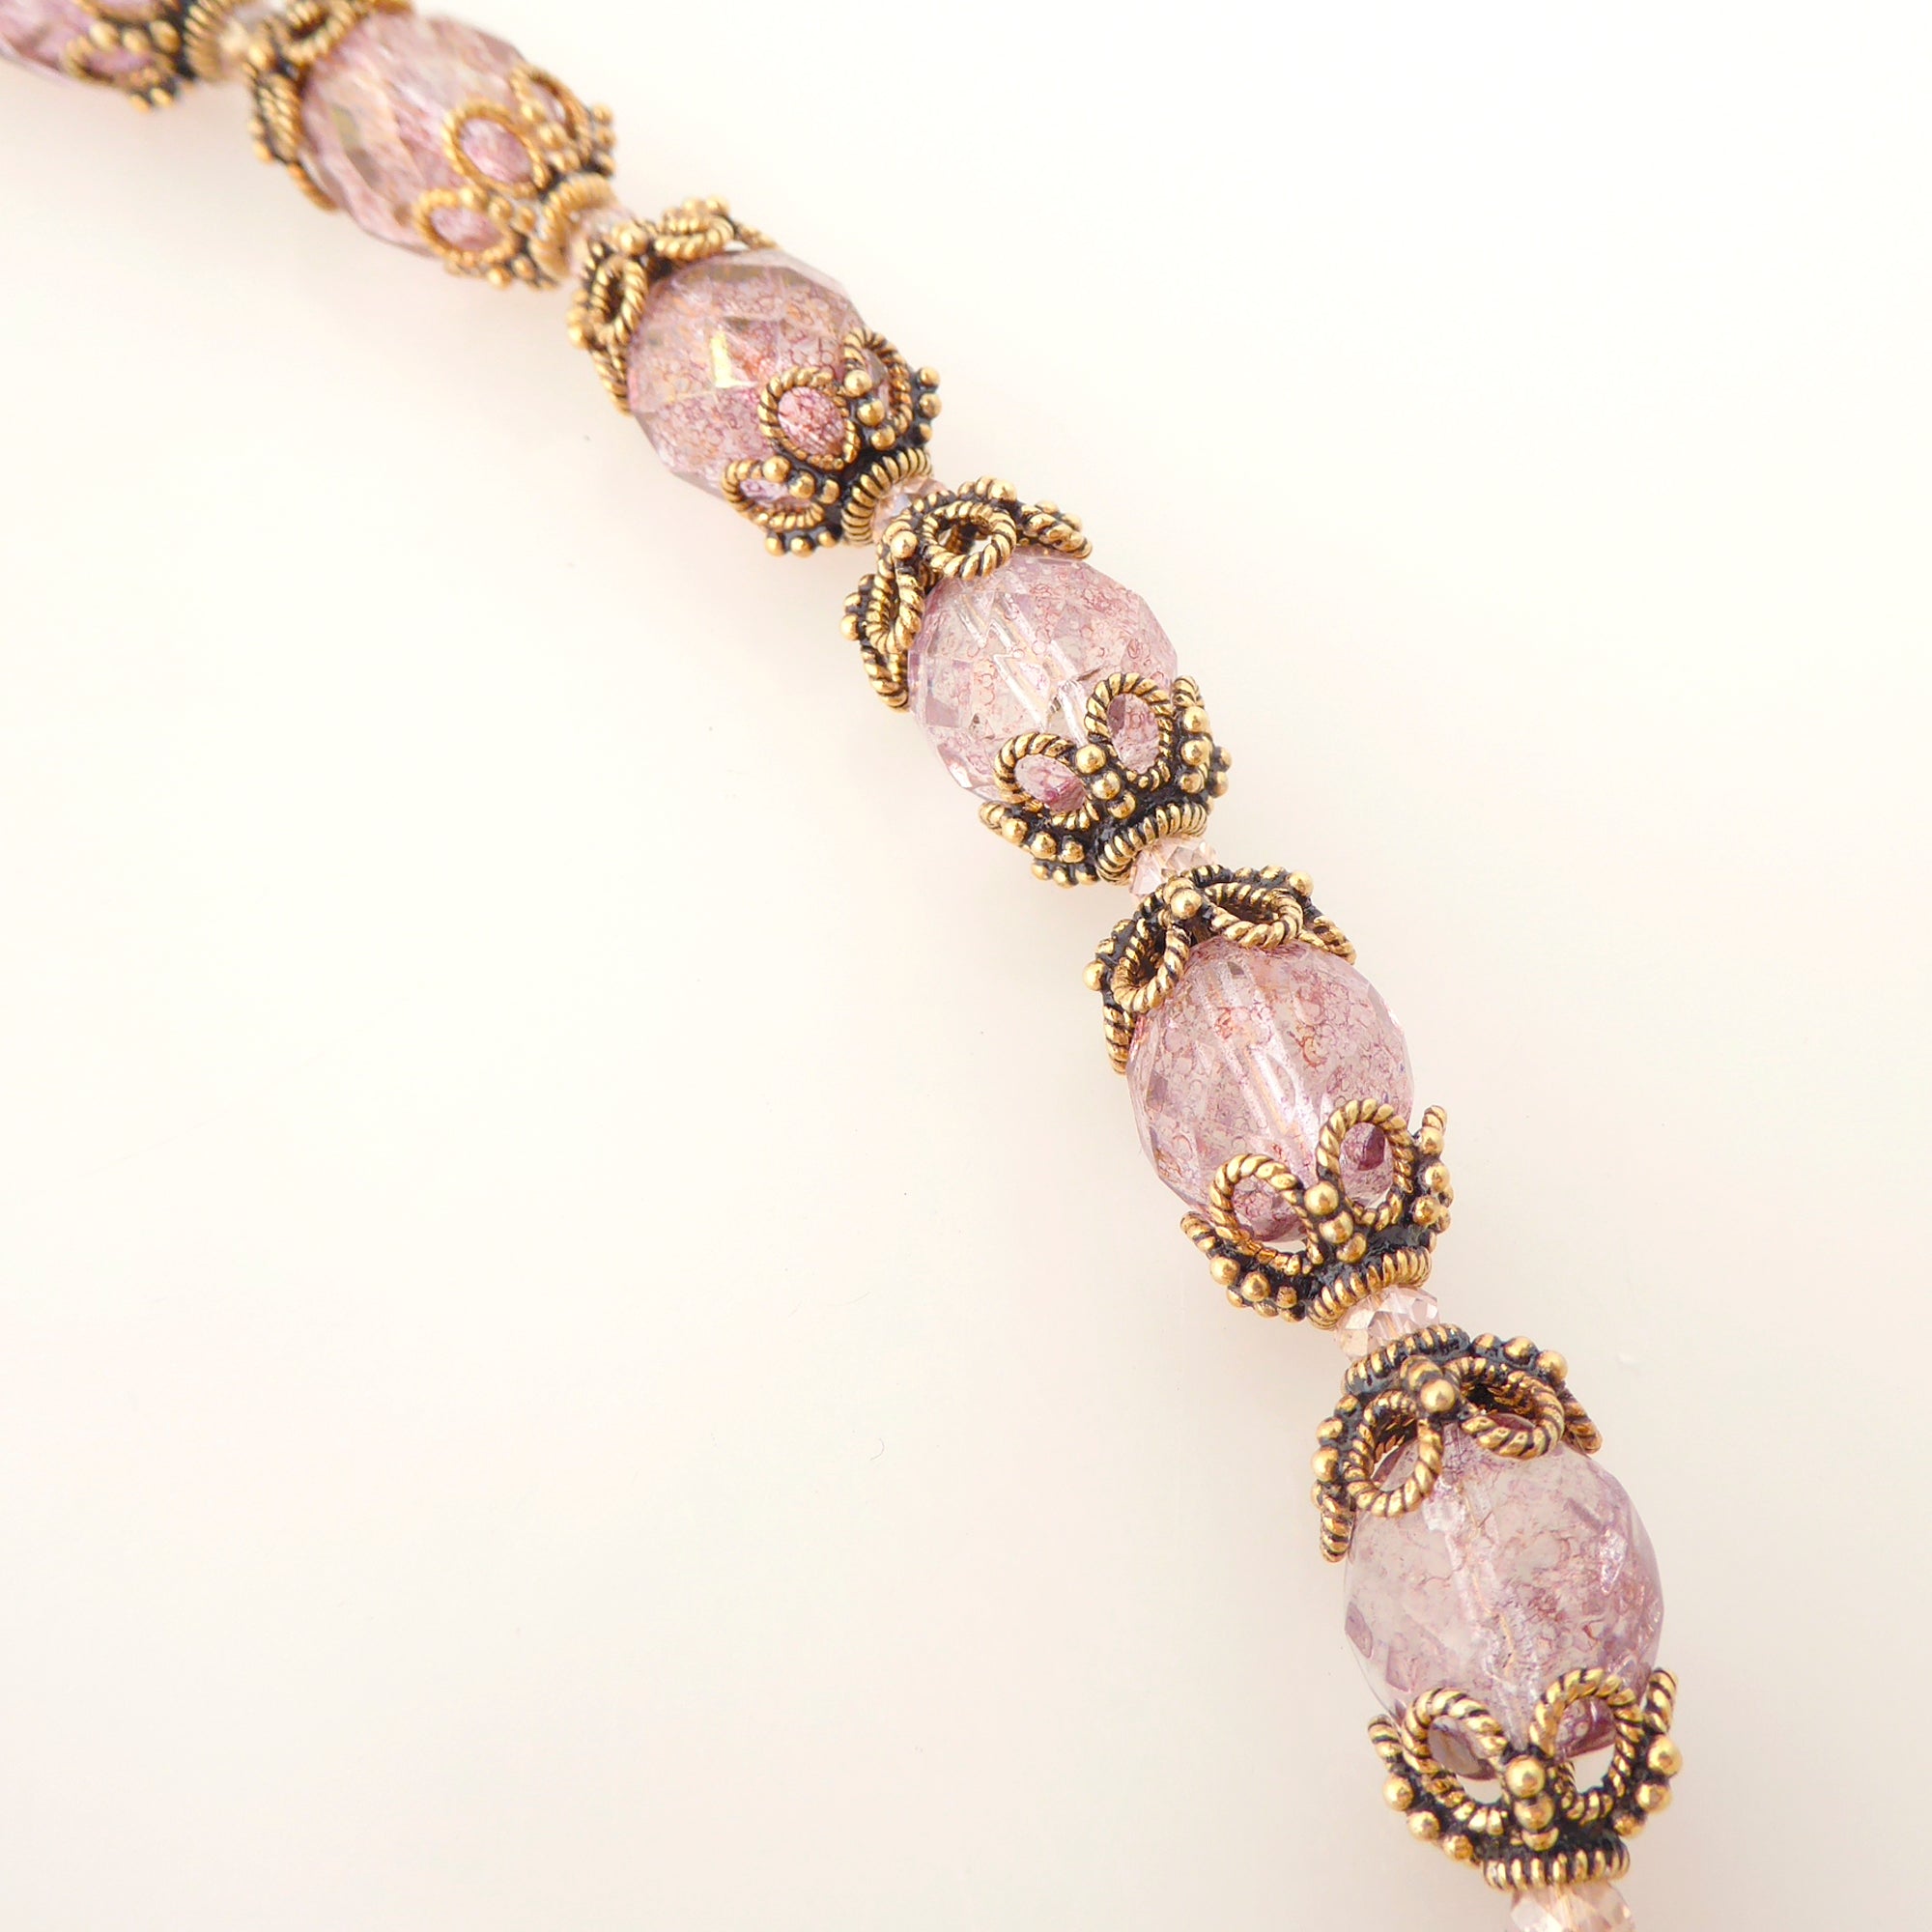 Amethyst rococo necklace by Jenny Dayco 5